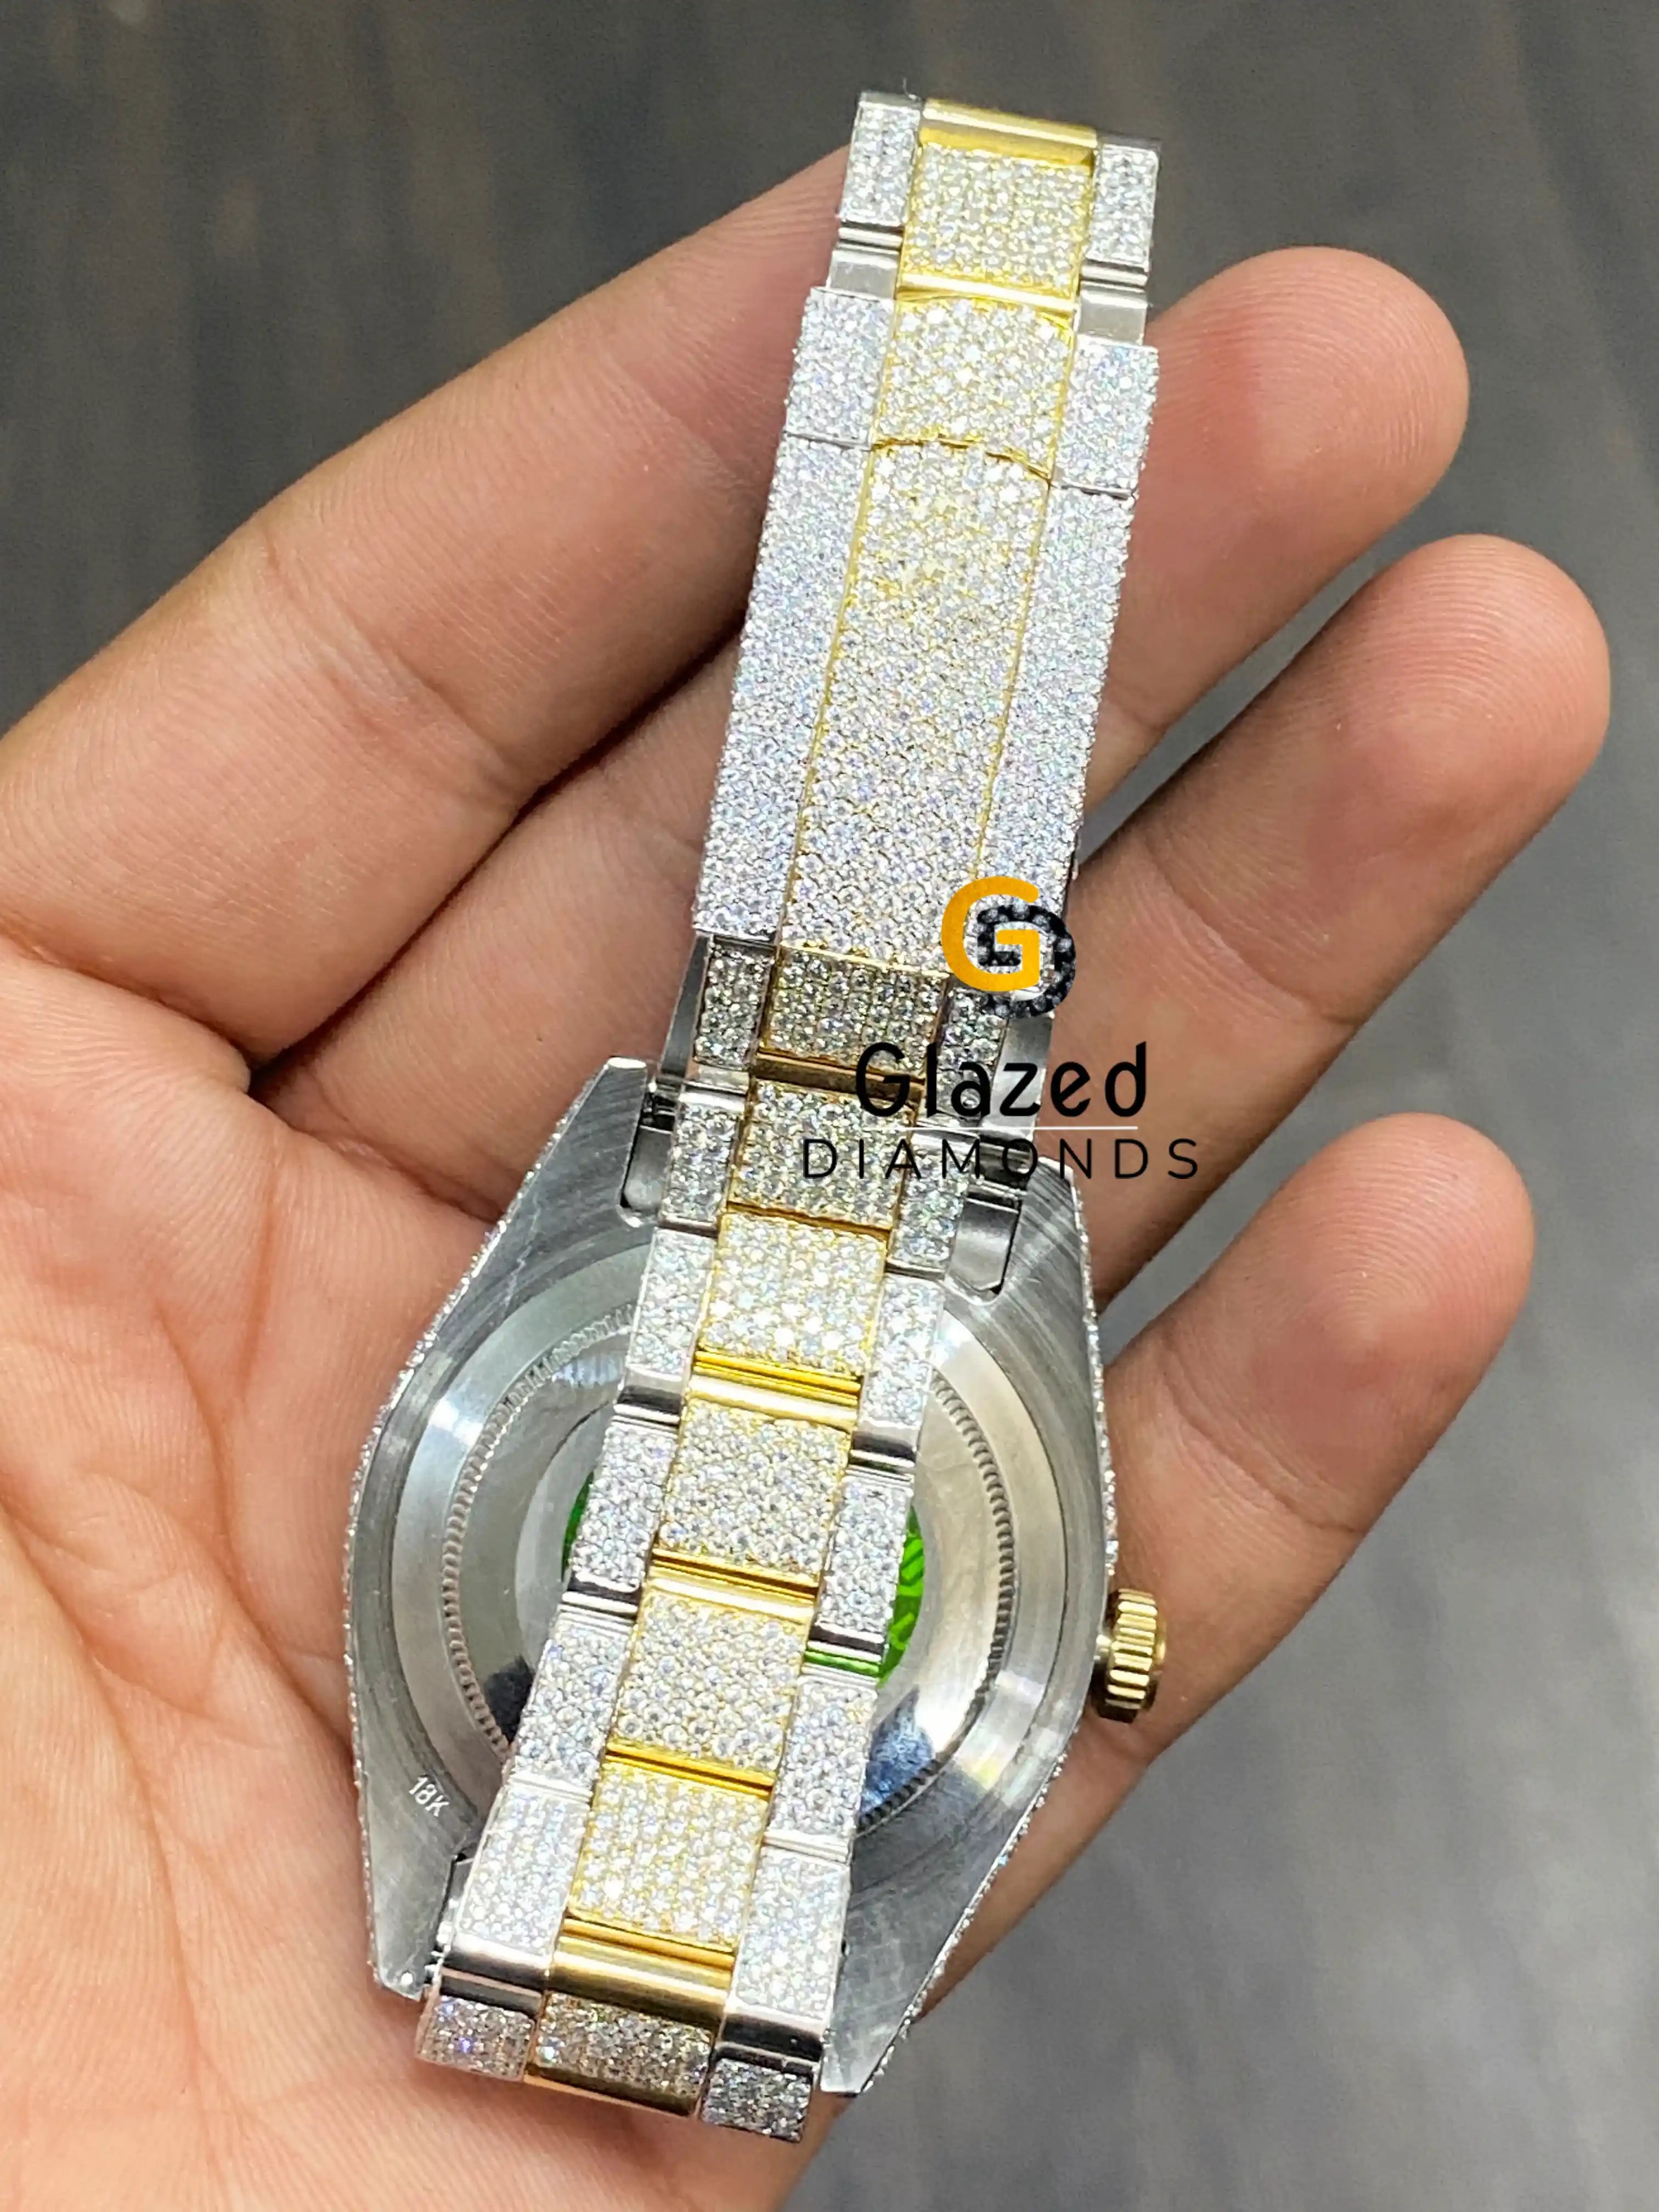 Fully Iced Out Two Tone Luxury VVS Moissanite Diamond Watch For Men